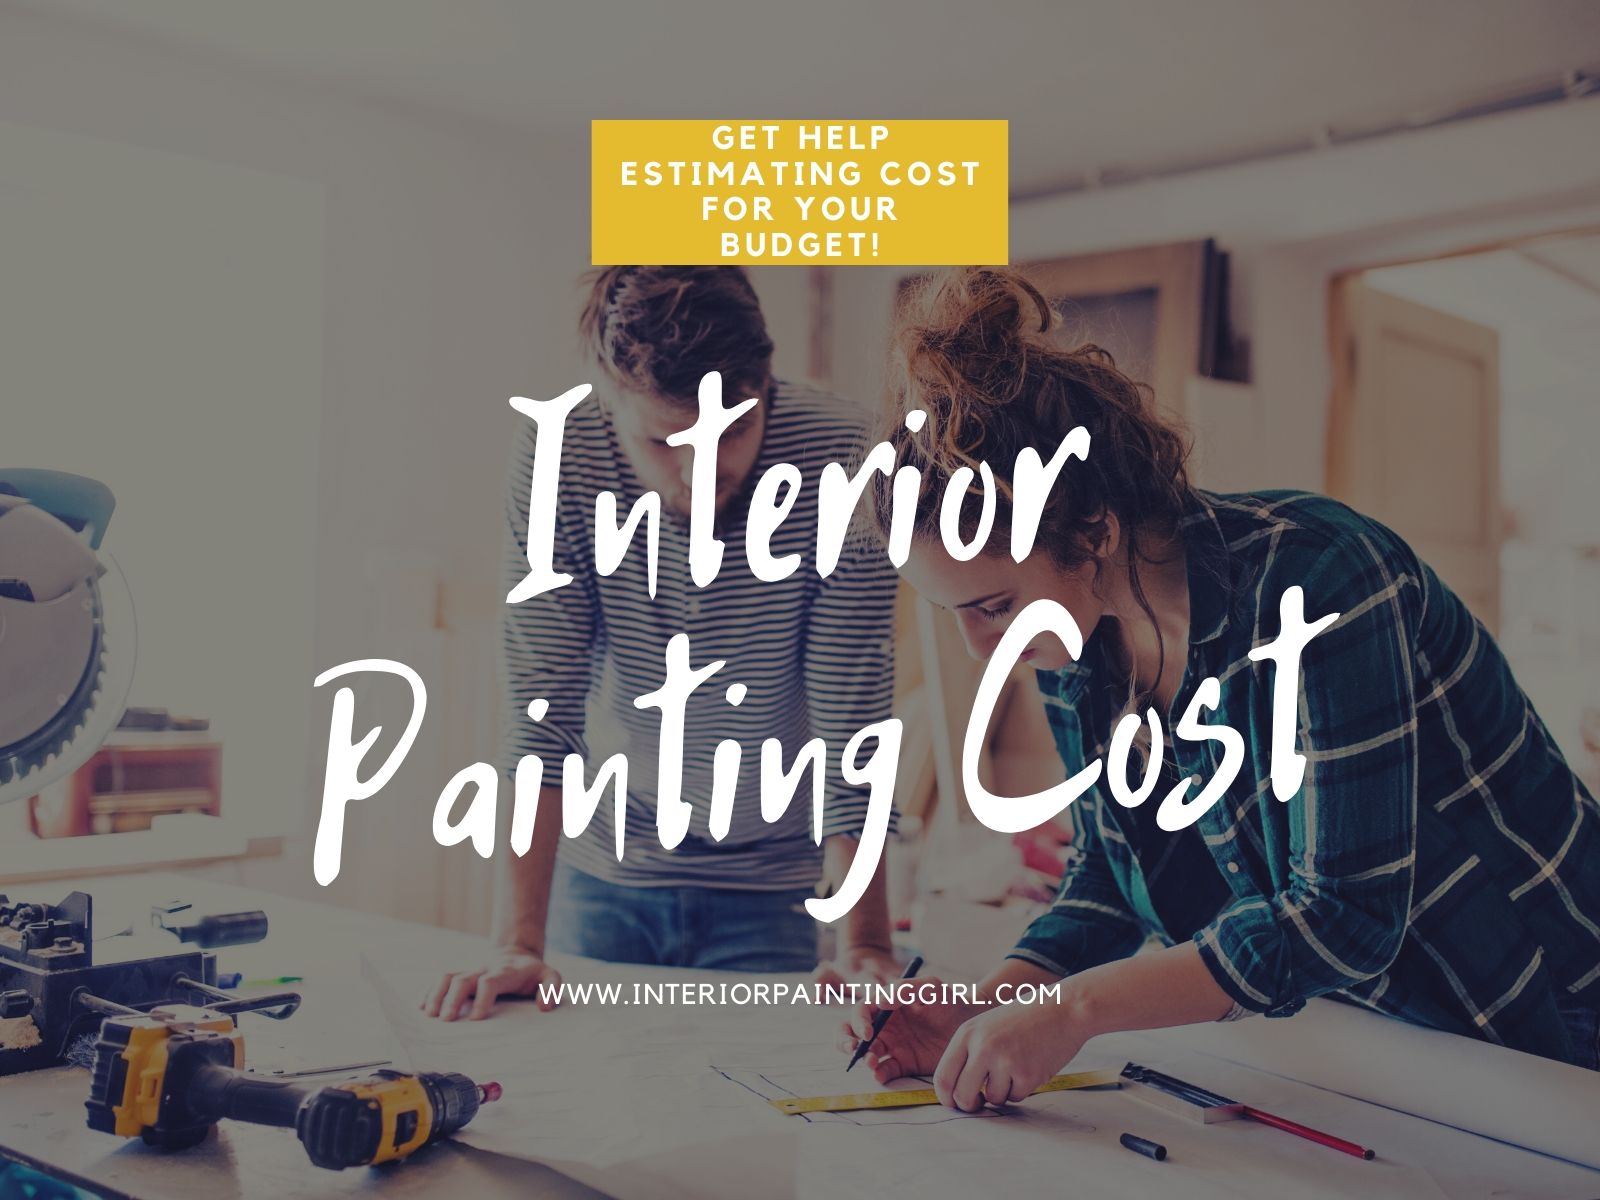 How can you estimate the cost of interior painting? Use our simple guide to help you!